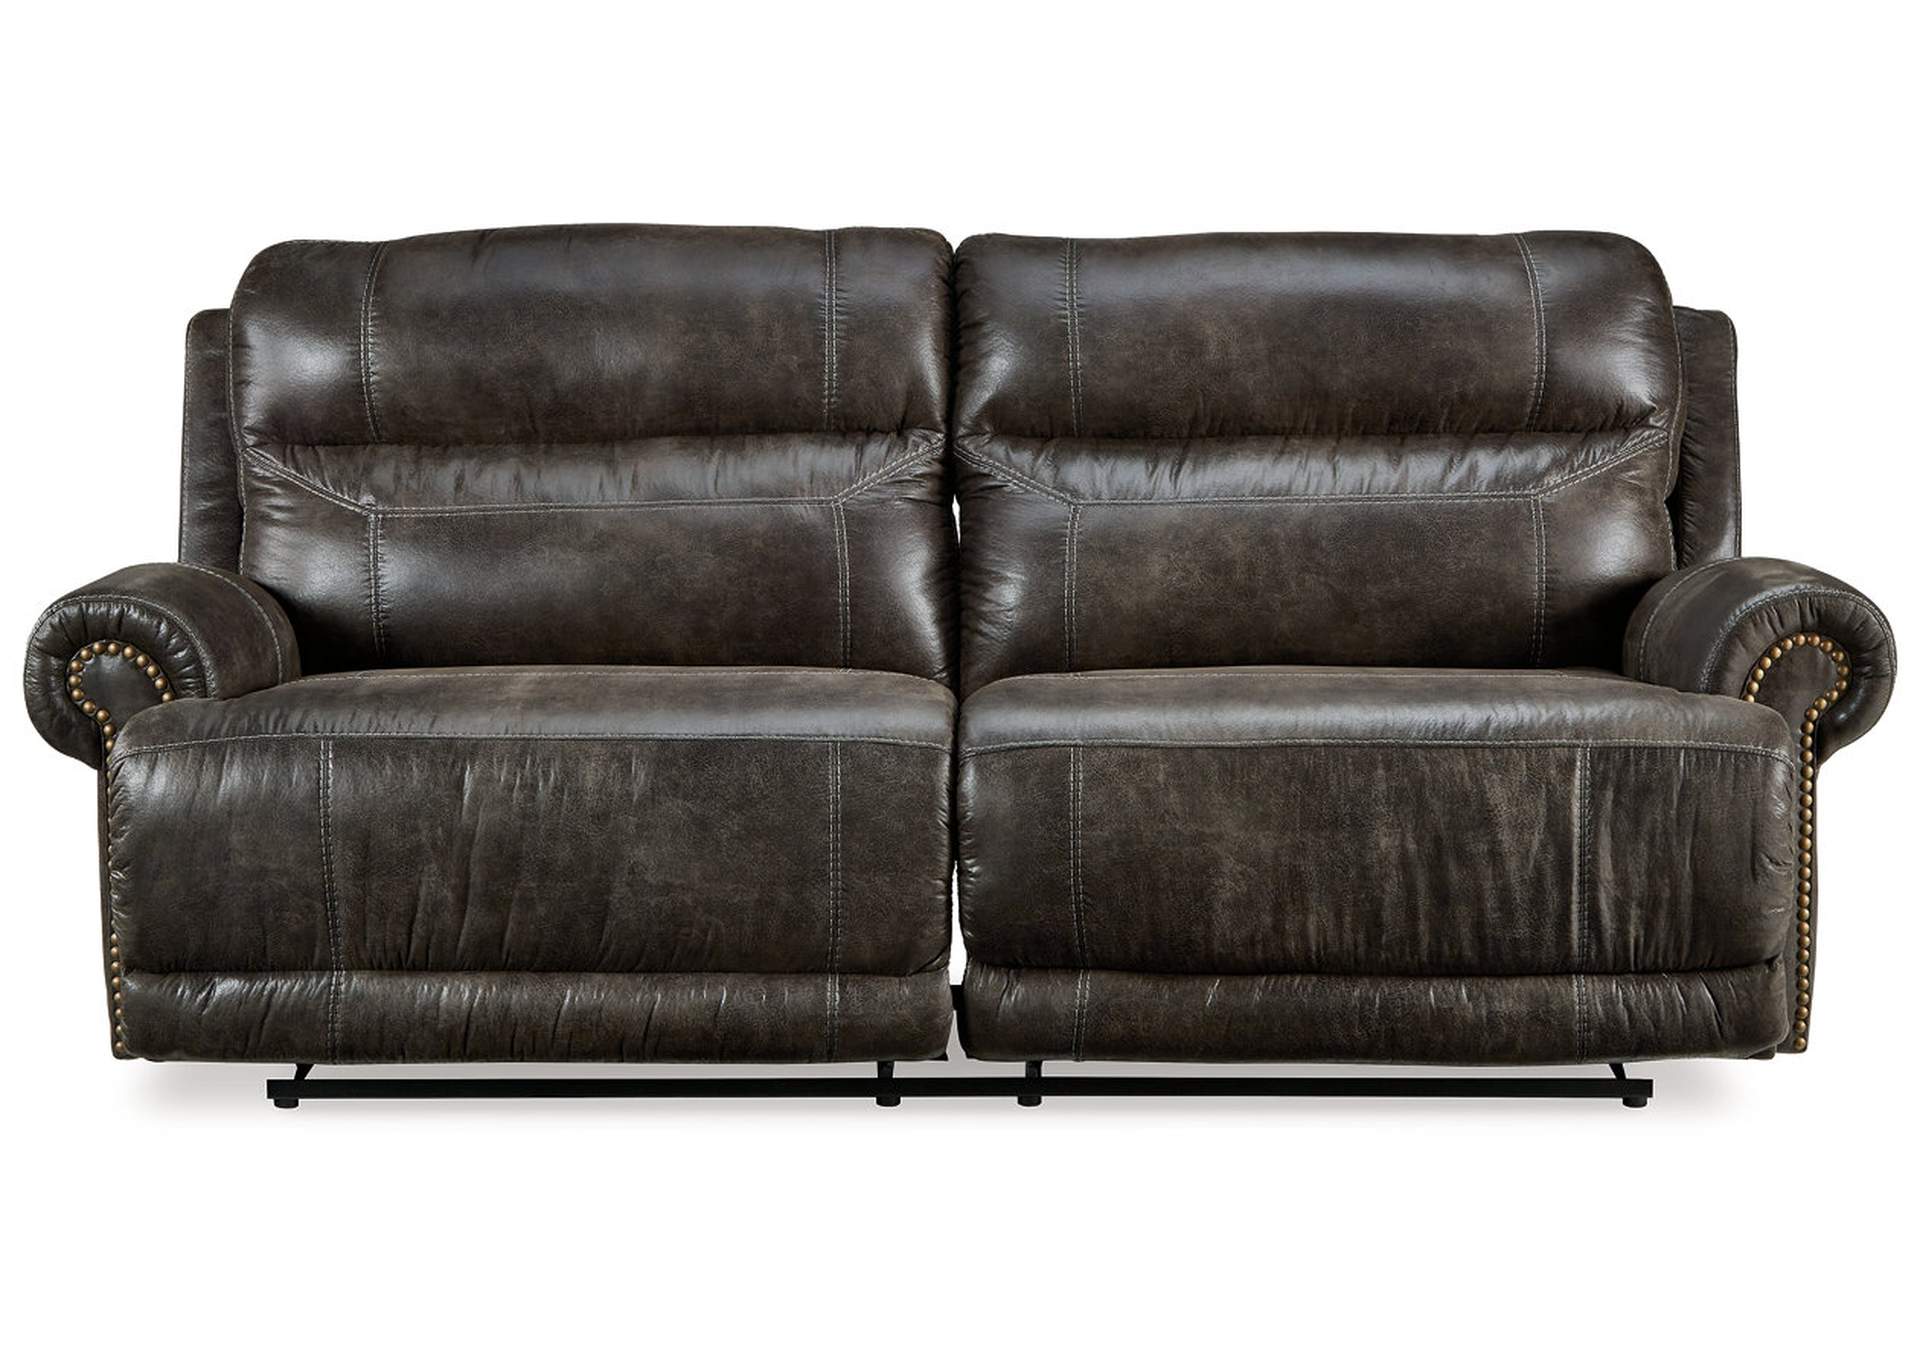 Grearview Power Reclining Sofa,Signature Design By Ashley